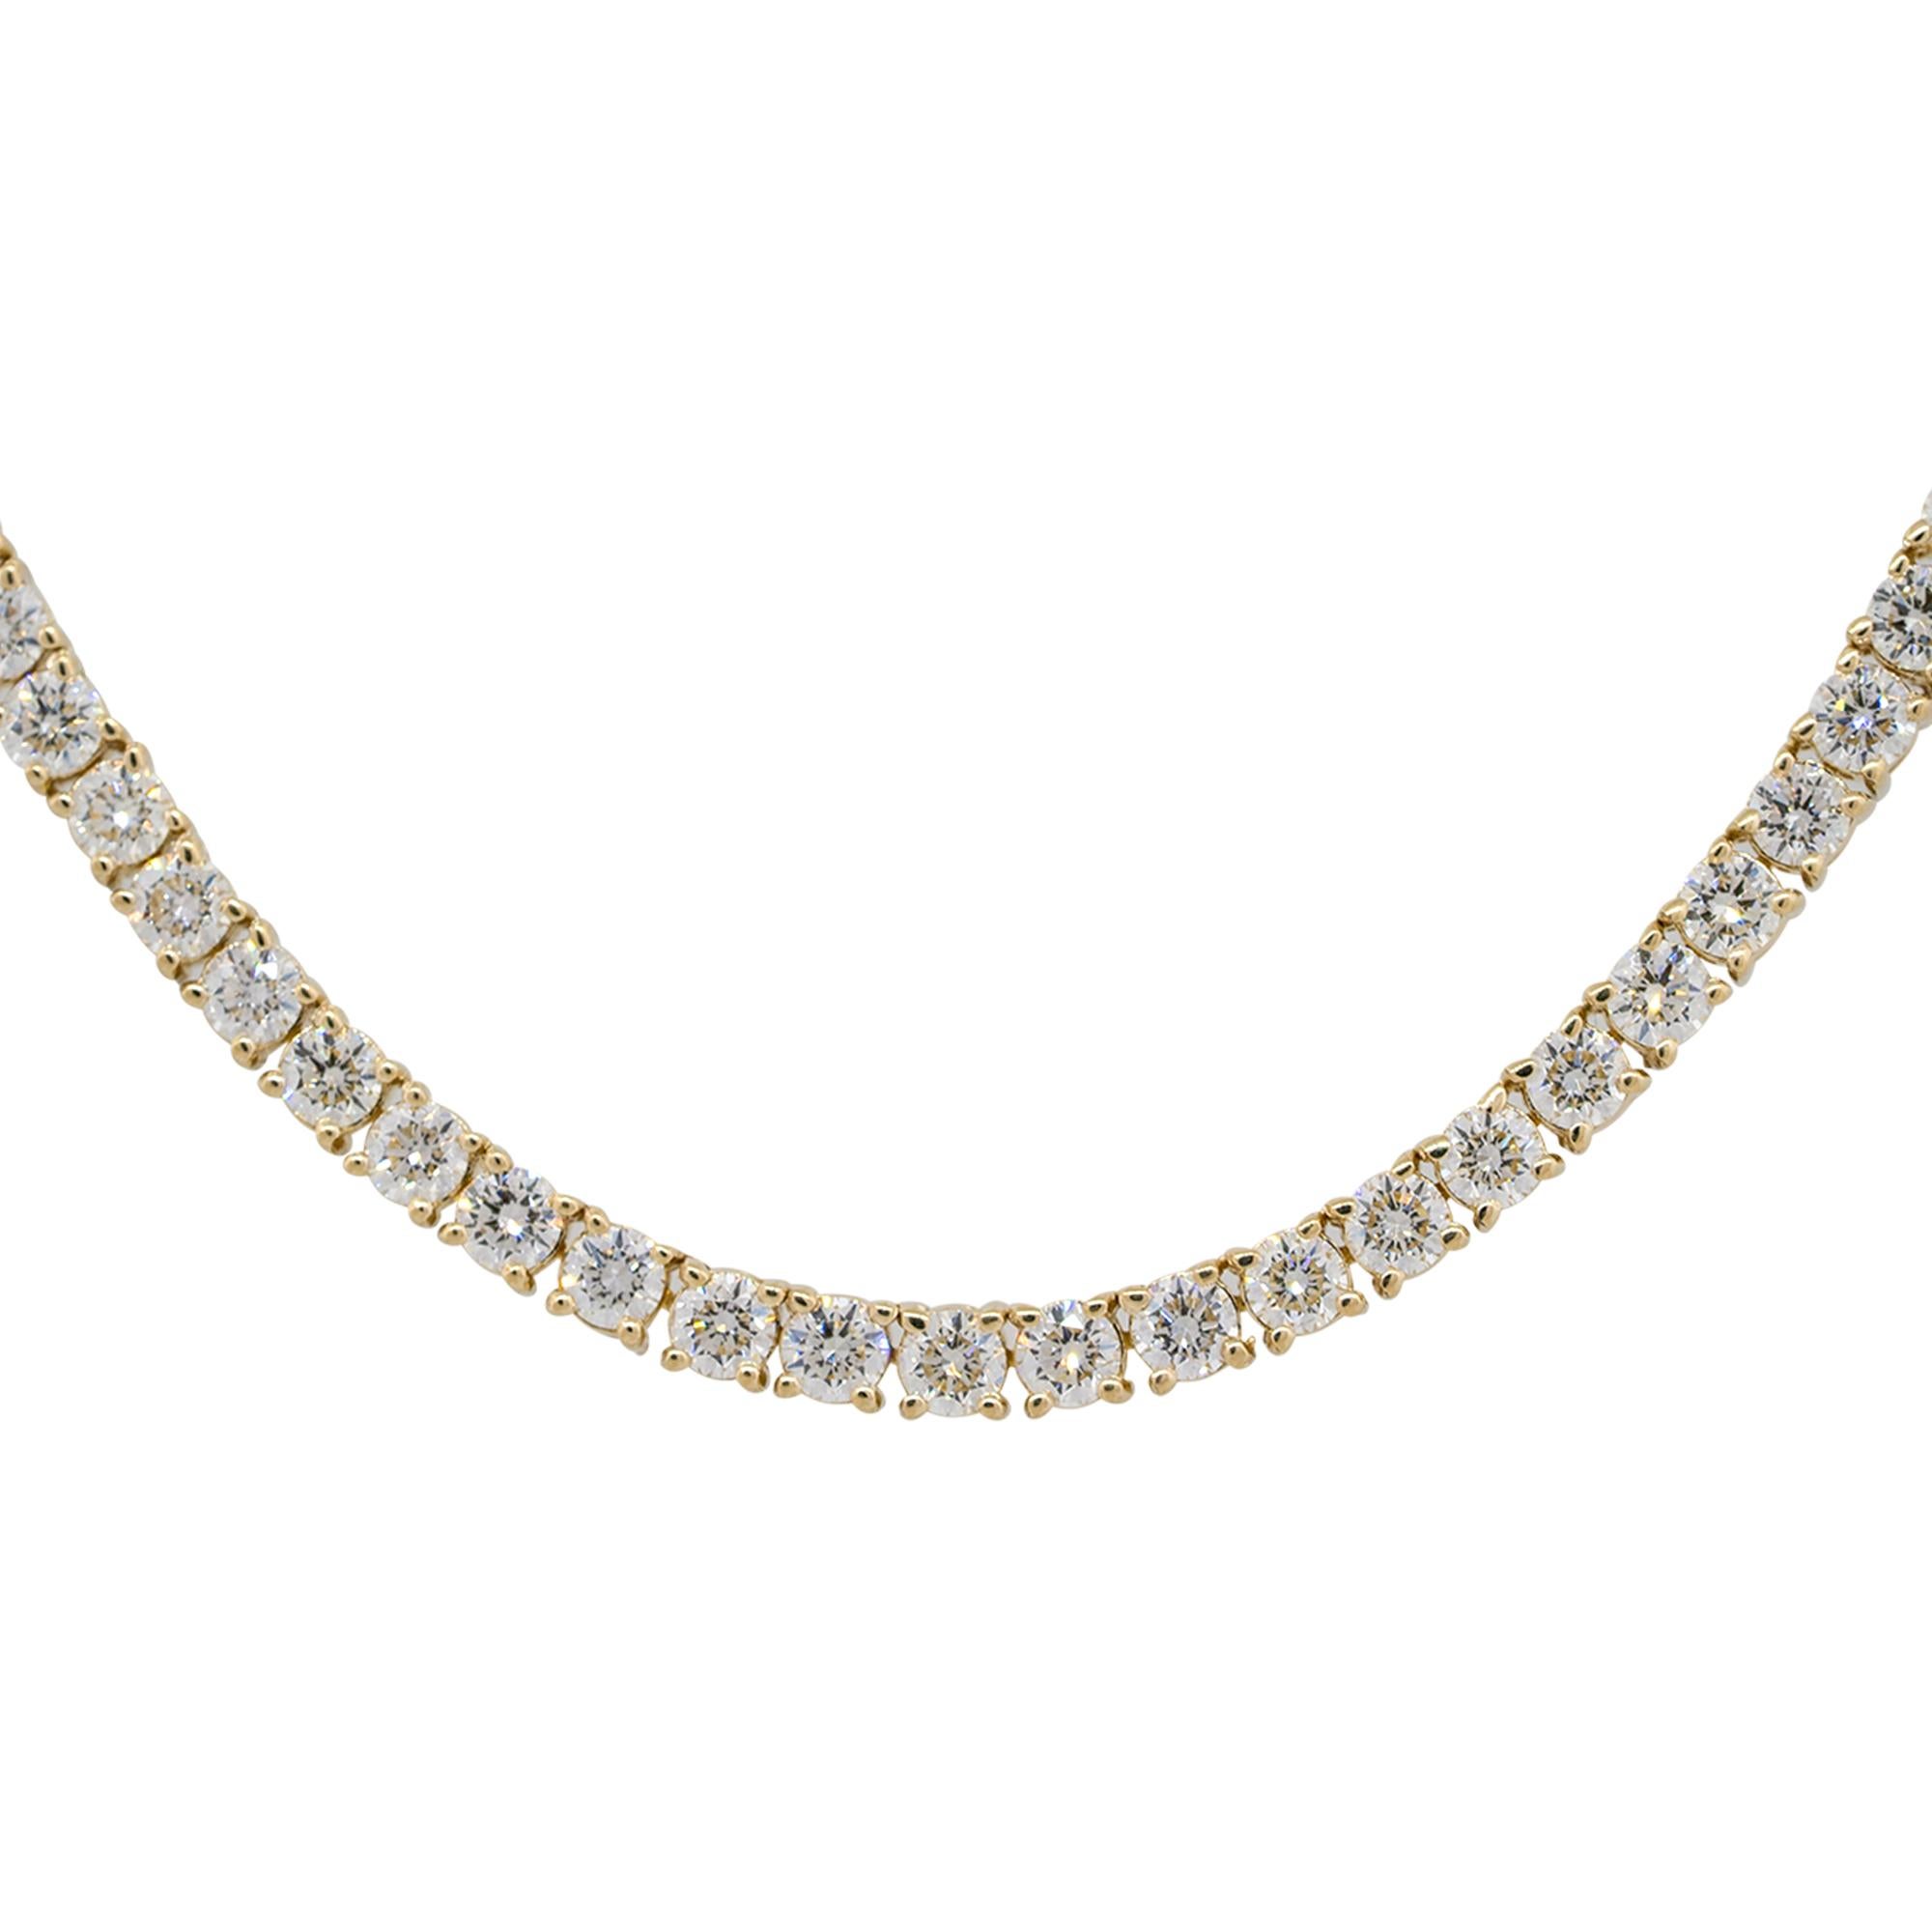 Material: 14k Yellow gold
Diamond Details: Approx. 7.08ctw of round cut Diamonds. Diamonds are G/H in color and VS in clarity
Clasps: Tongue in box with safety clasp
Total Weight: 16.9g (10.8dwt)
Length: 20